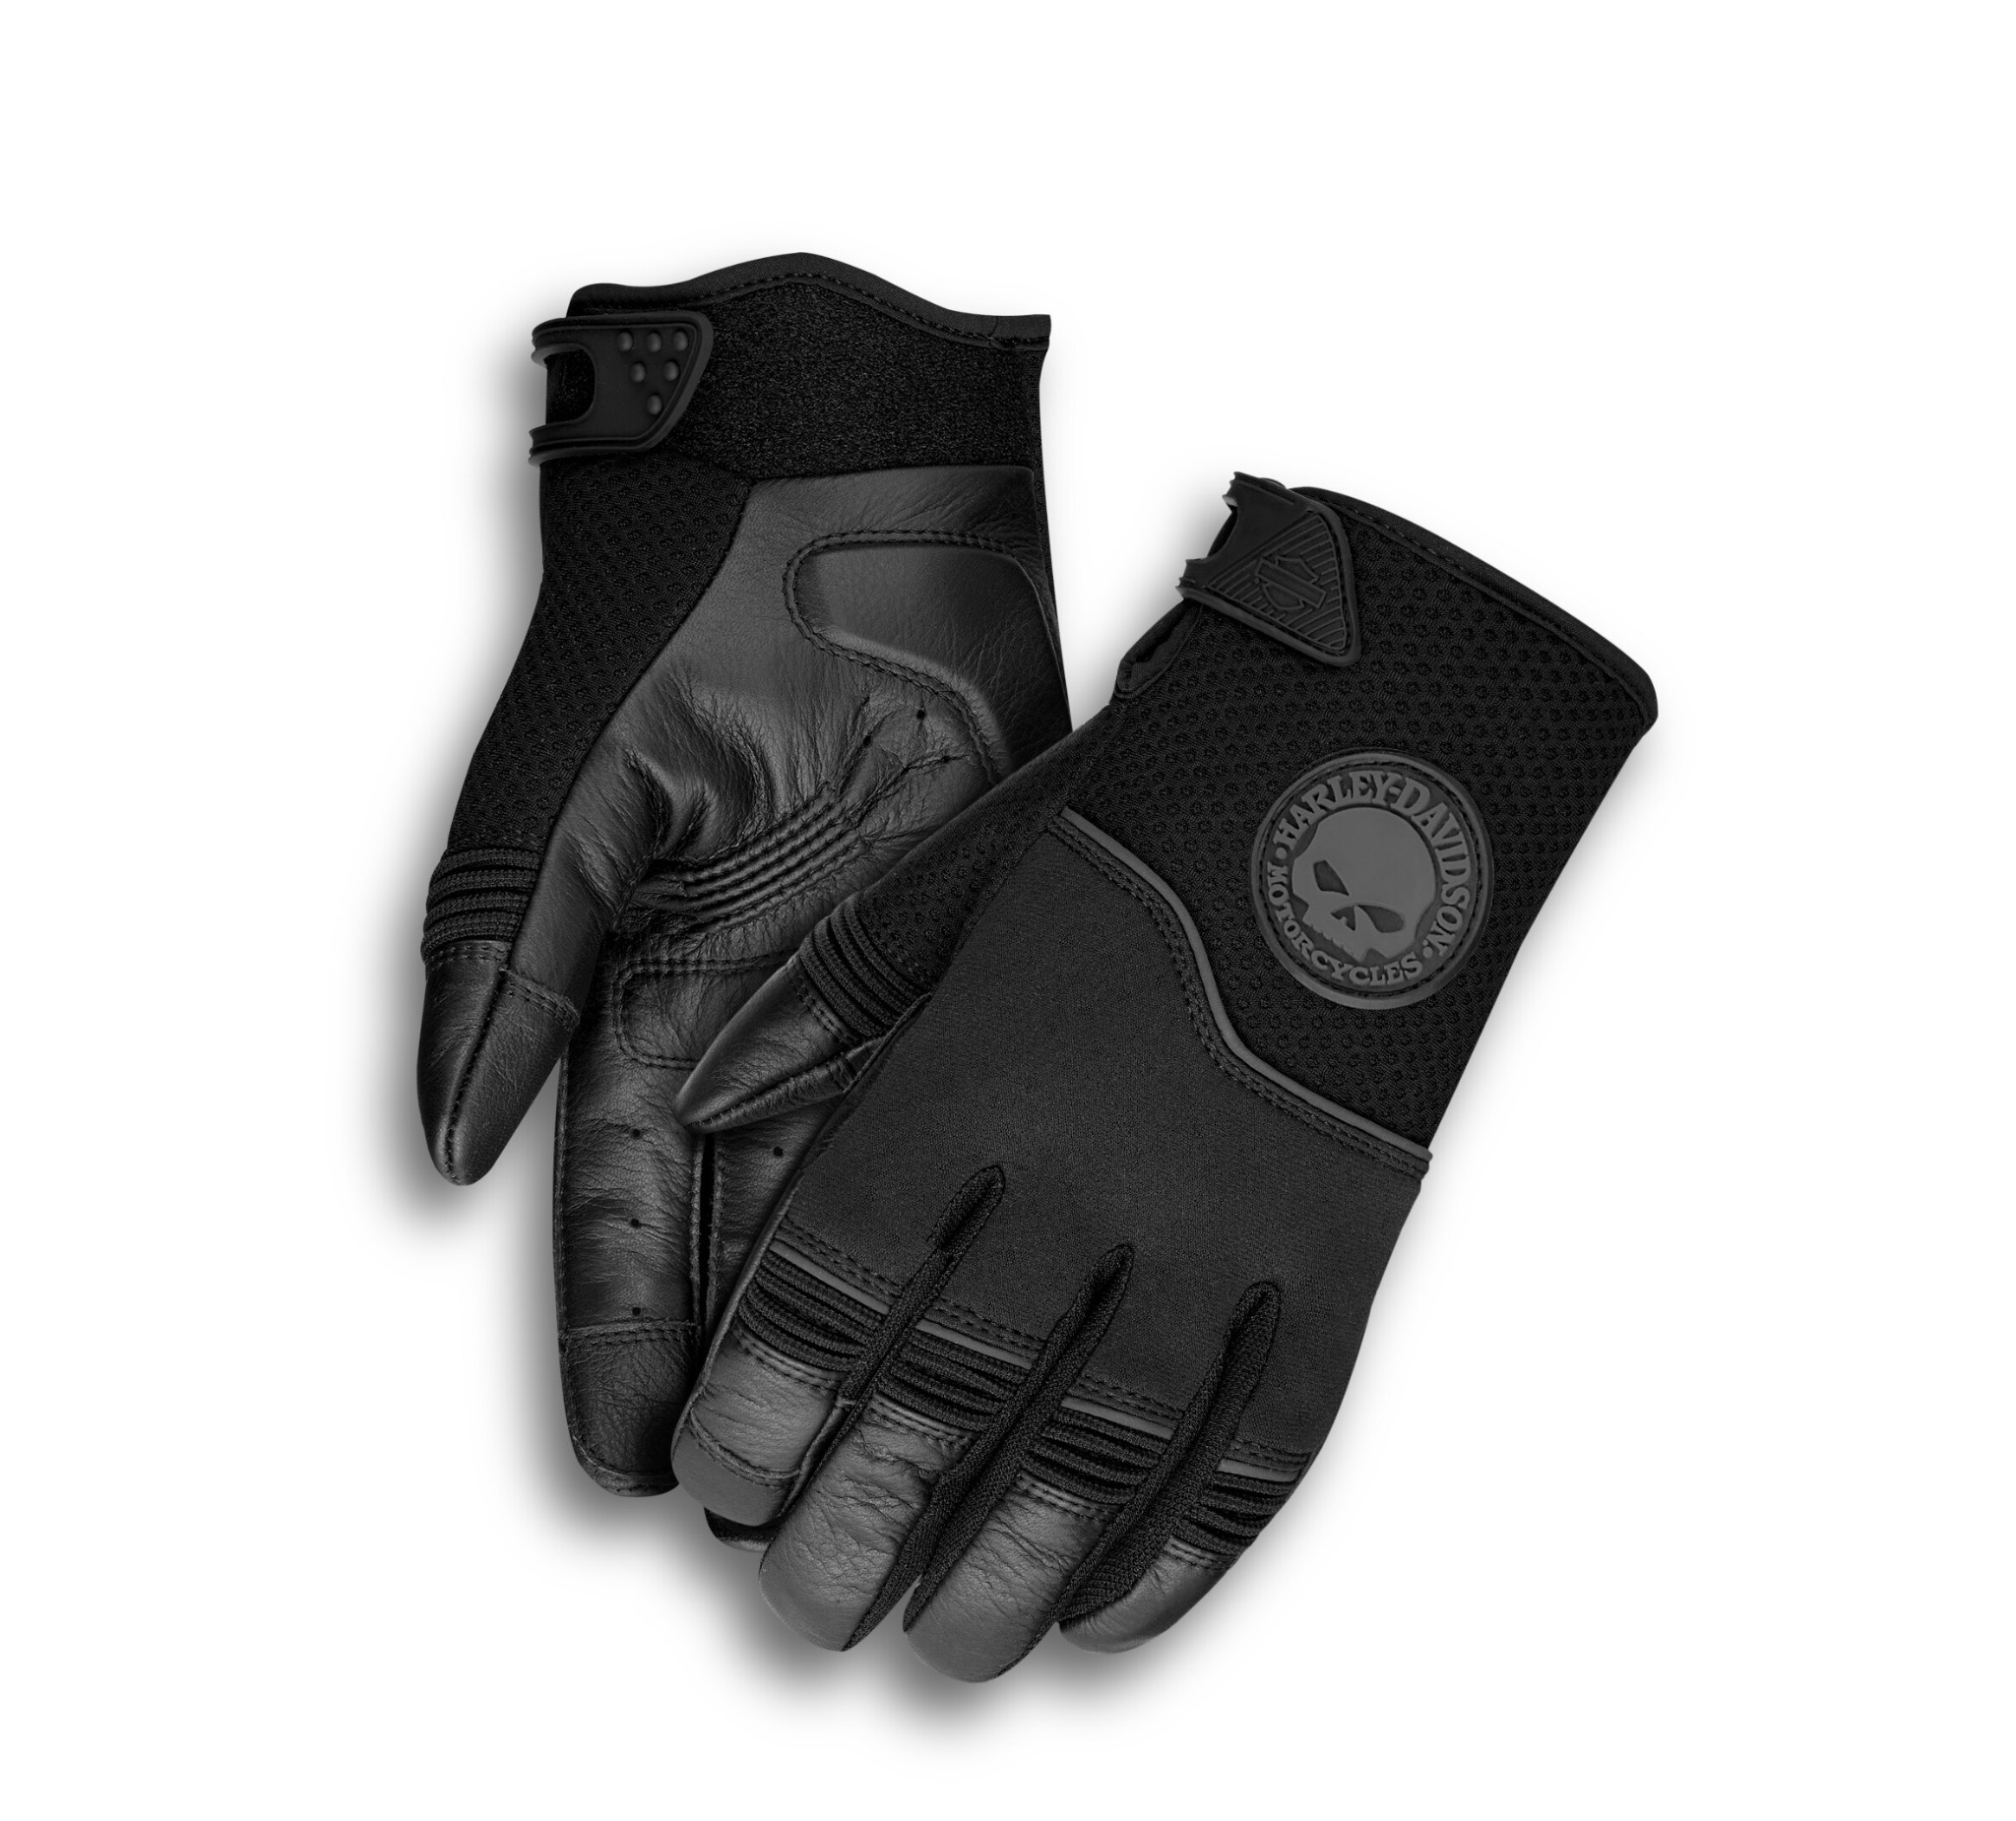 Men's Newhall Mixed Media Gloves